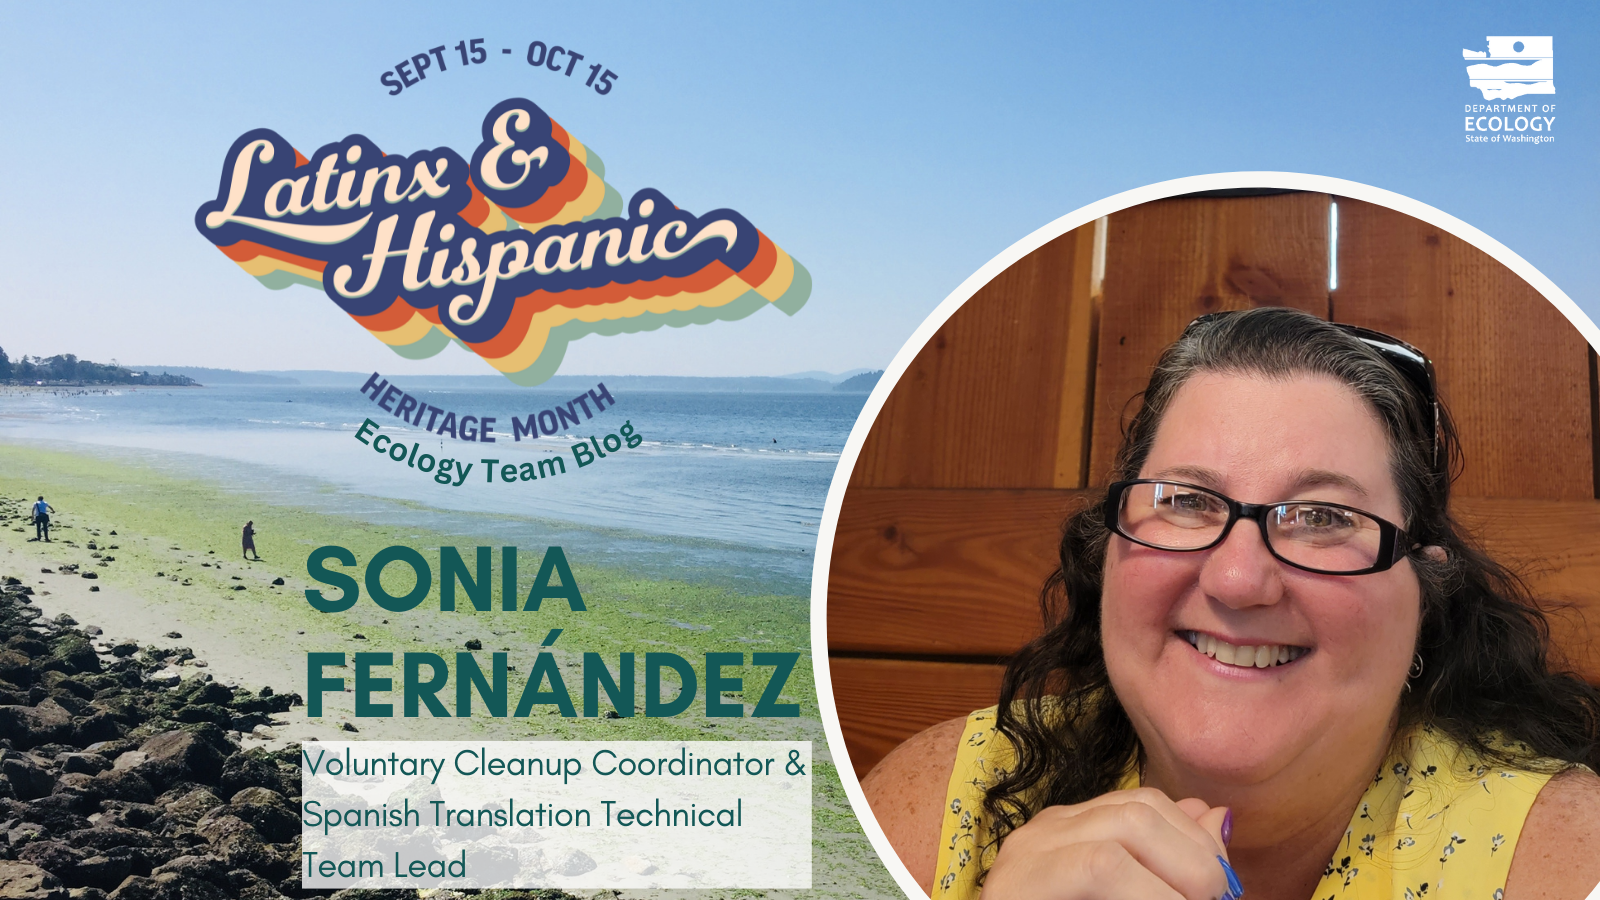 Puget Sound beach in background with Latinx and Hispanic Heritage logo. Photo of Sonia Fernandez in foreground.